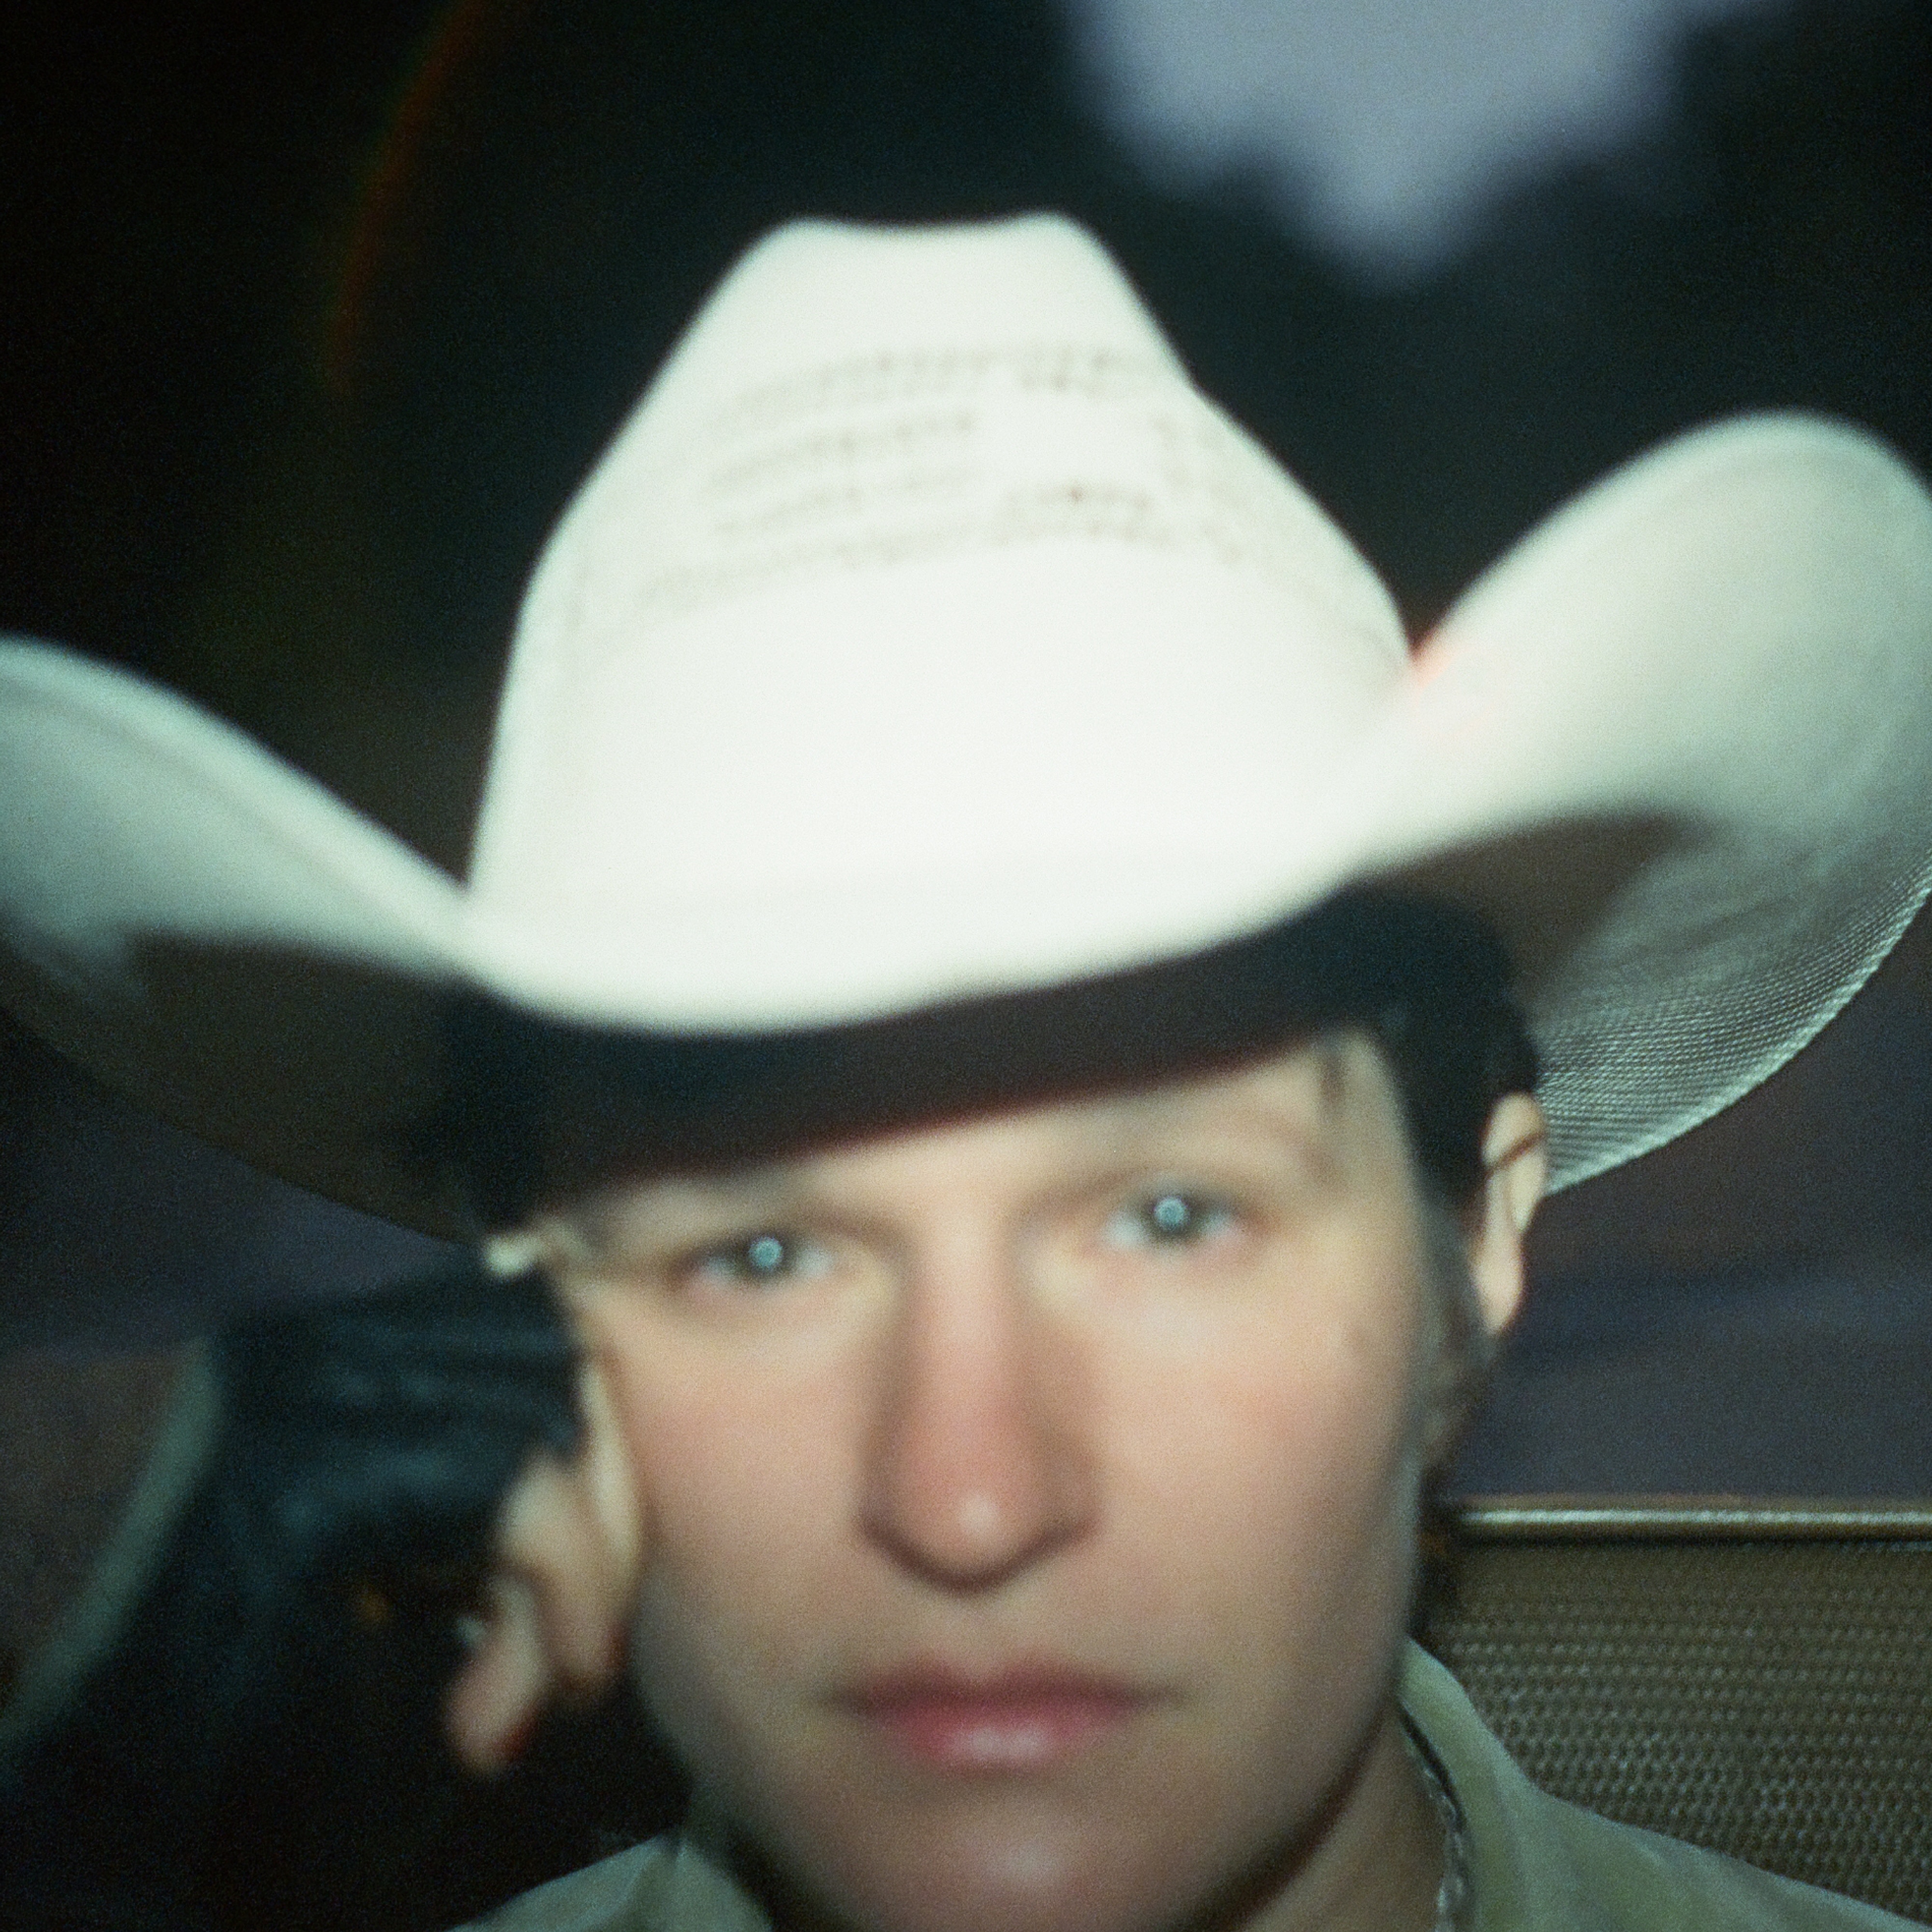 Out-of-focus portrait of woman wearing white cowboy hat with fingerless leather glove to her right temple